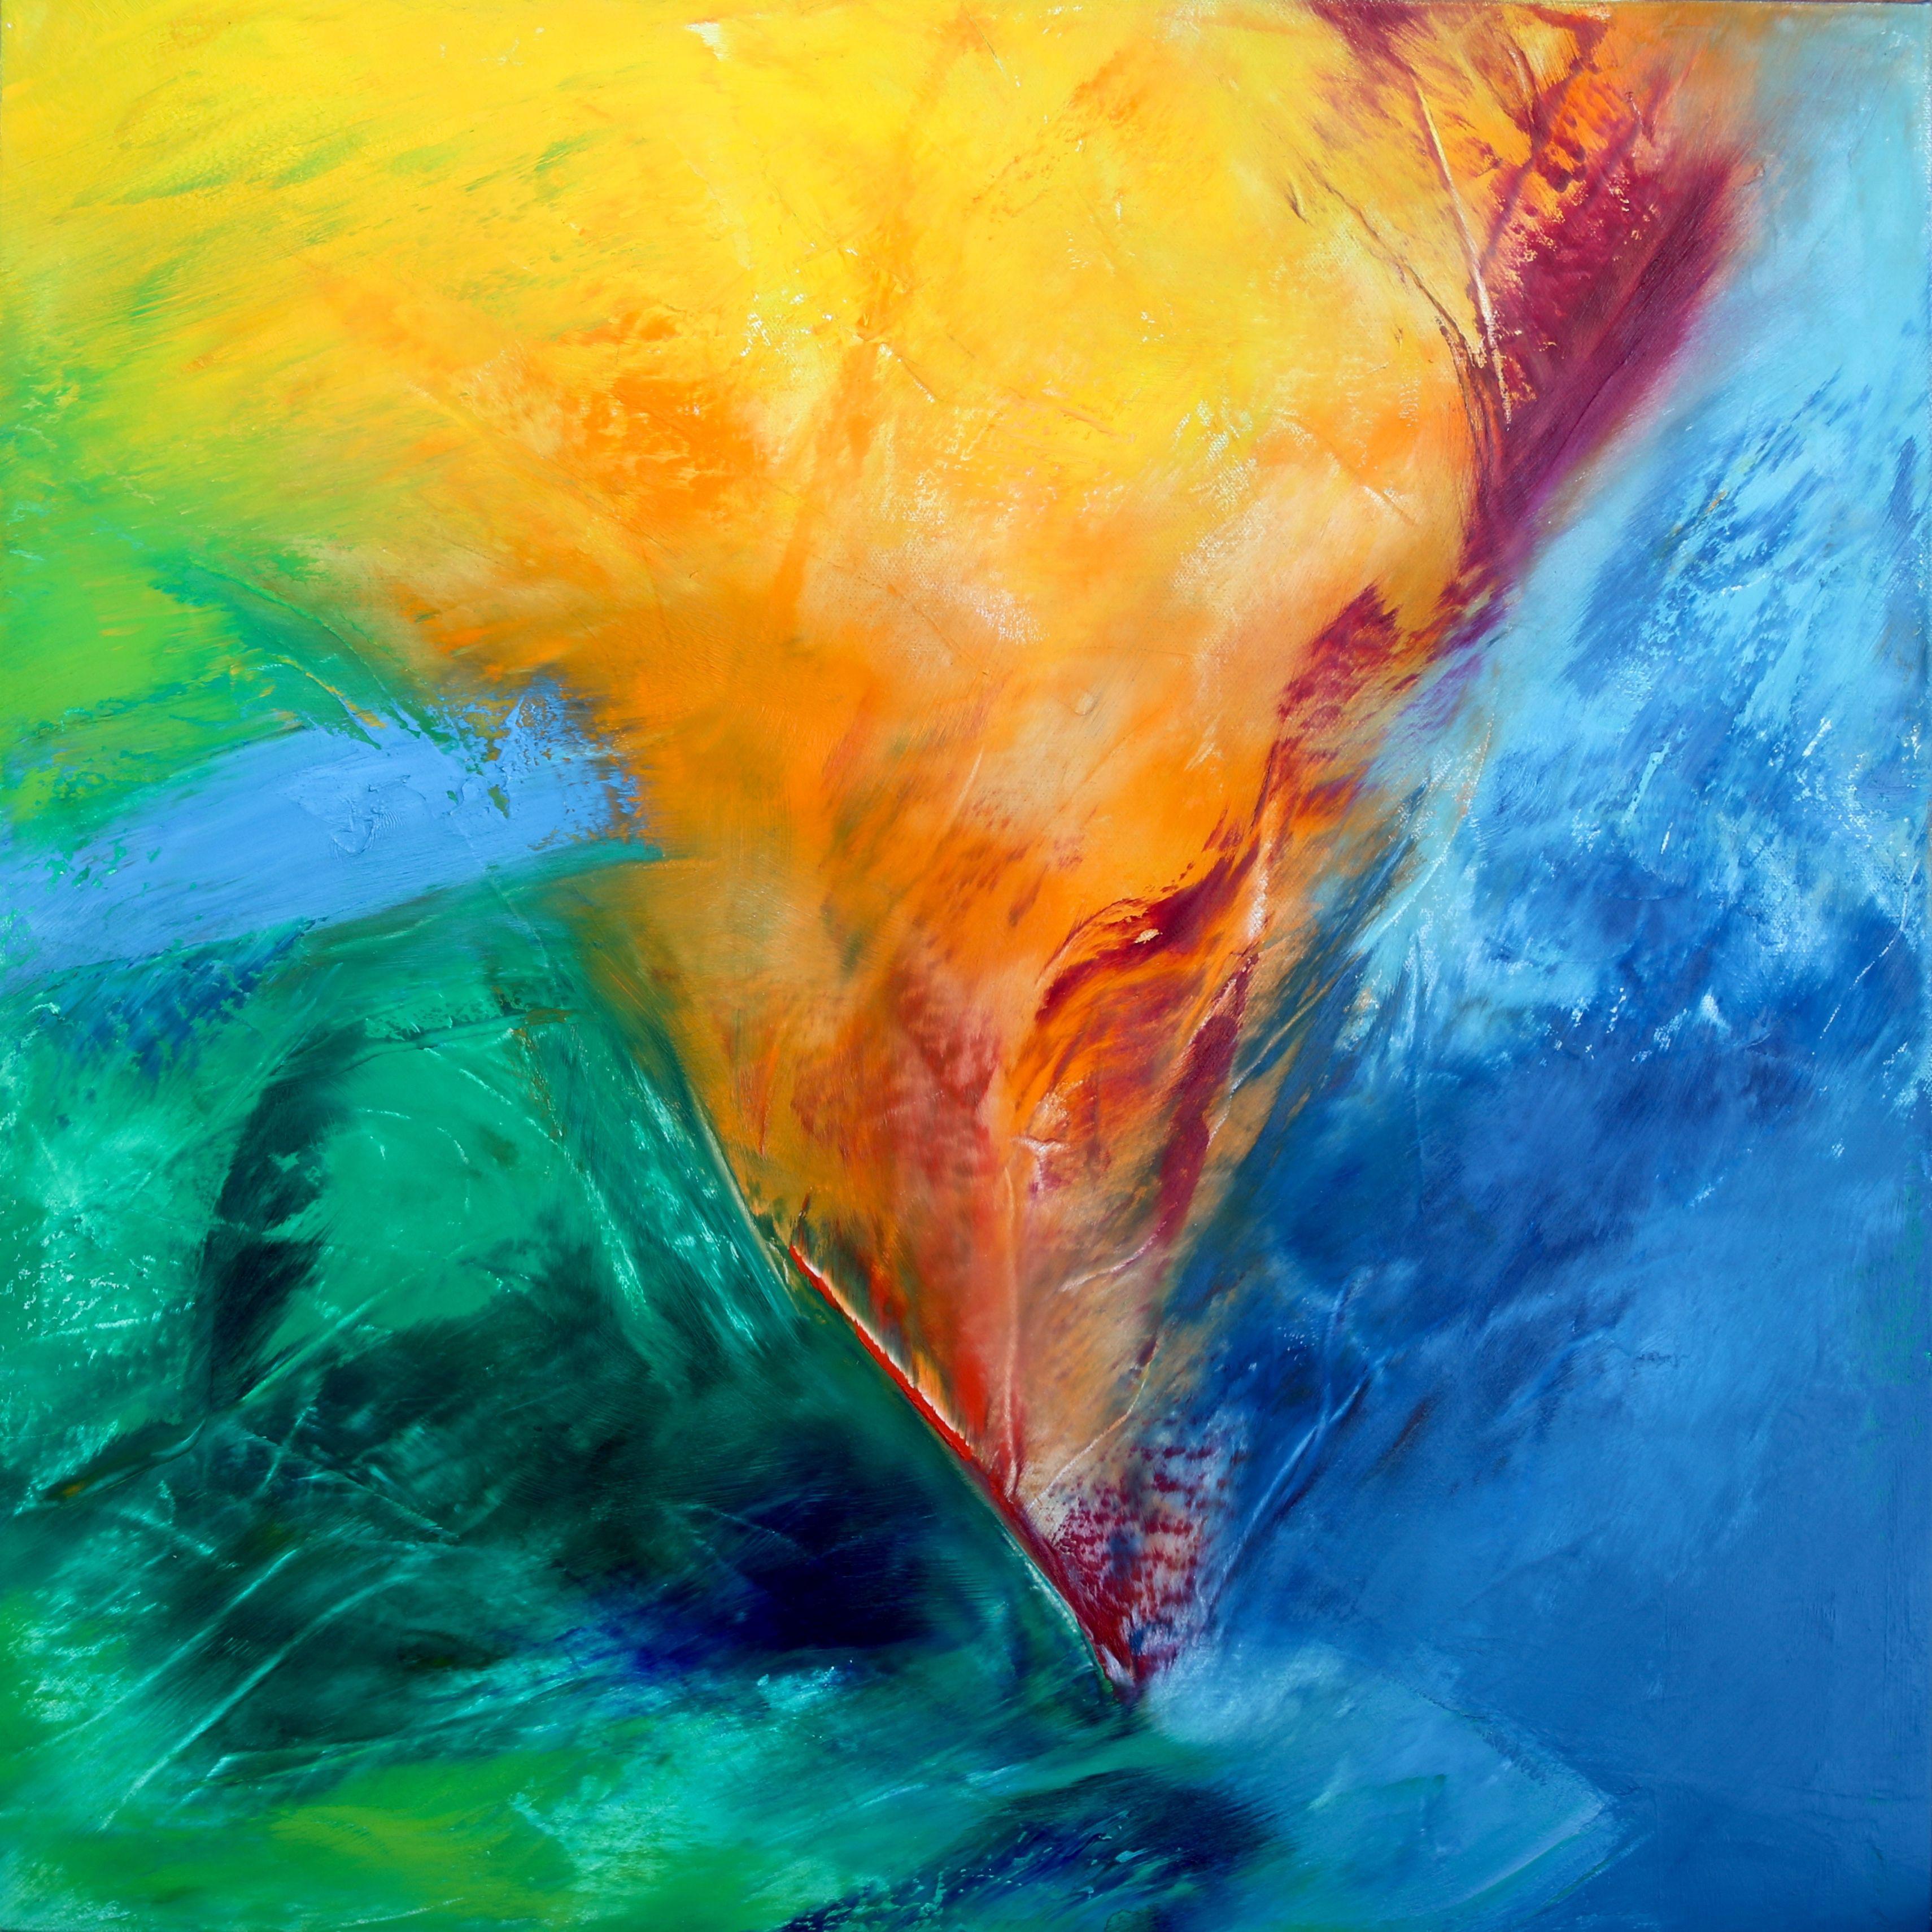 Abstract Painting Sheryl Tempchin - Volcano, Peinture, Huile sur Toile